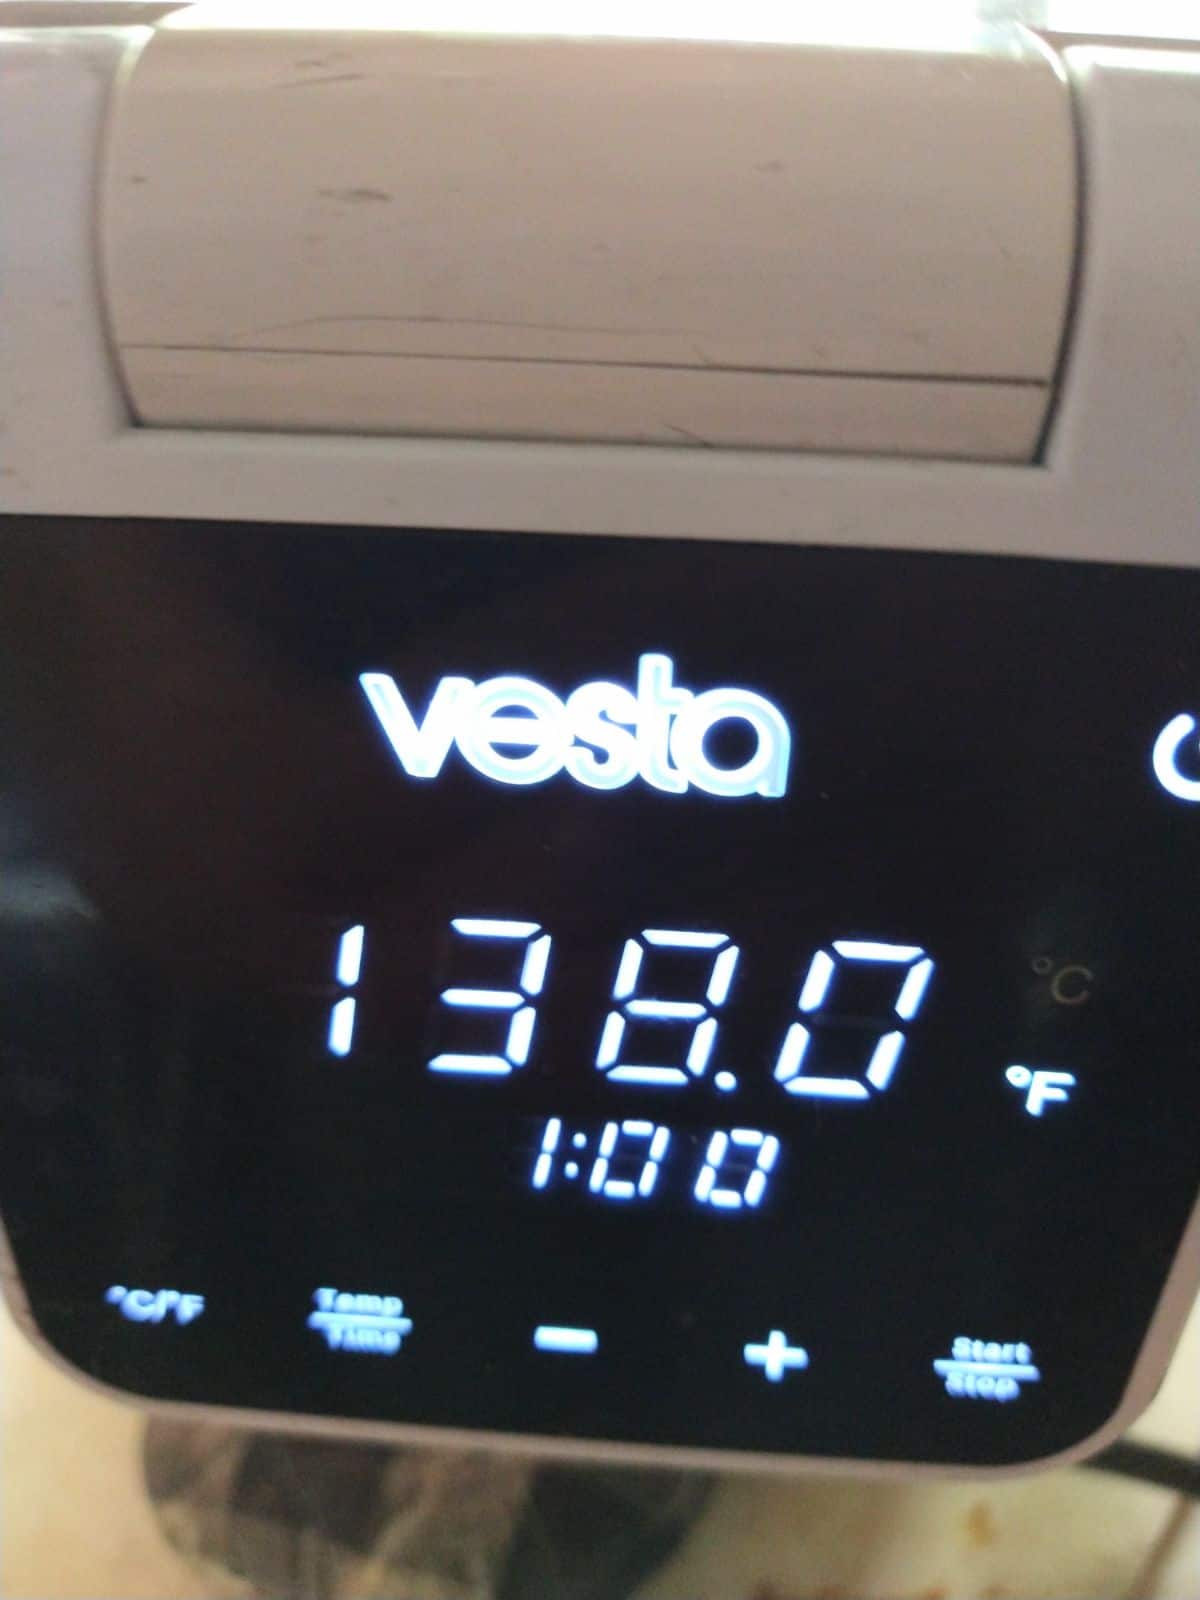 A white Vesta Immersion Circulator shown set to 138 degrees for 1 hour.